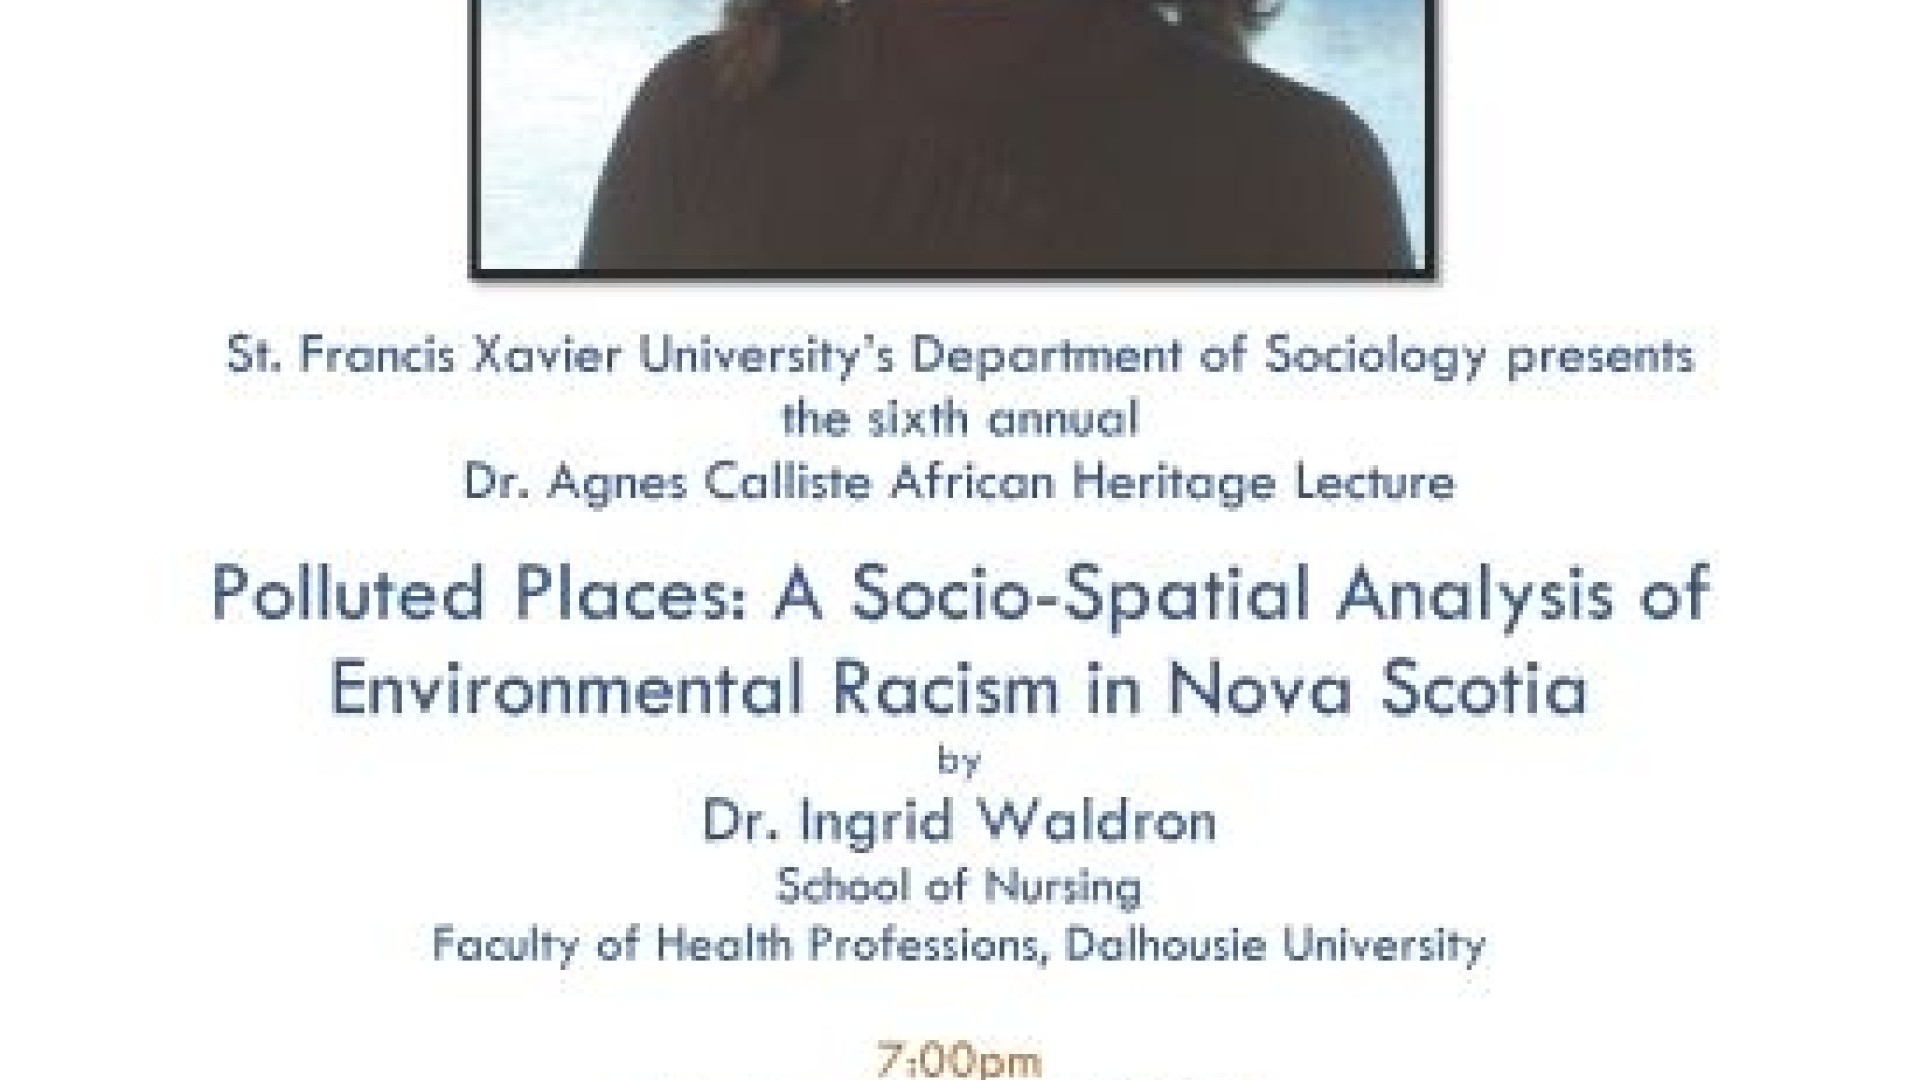 Poster: Polluted Places: A Socio-Spatial Analysis of Environment Racism in Nova Scotia featuring Dr. Ingrid Waldran